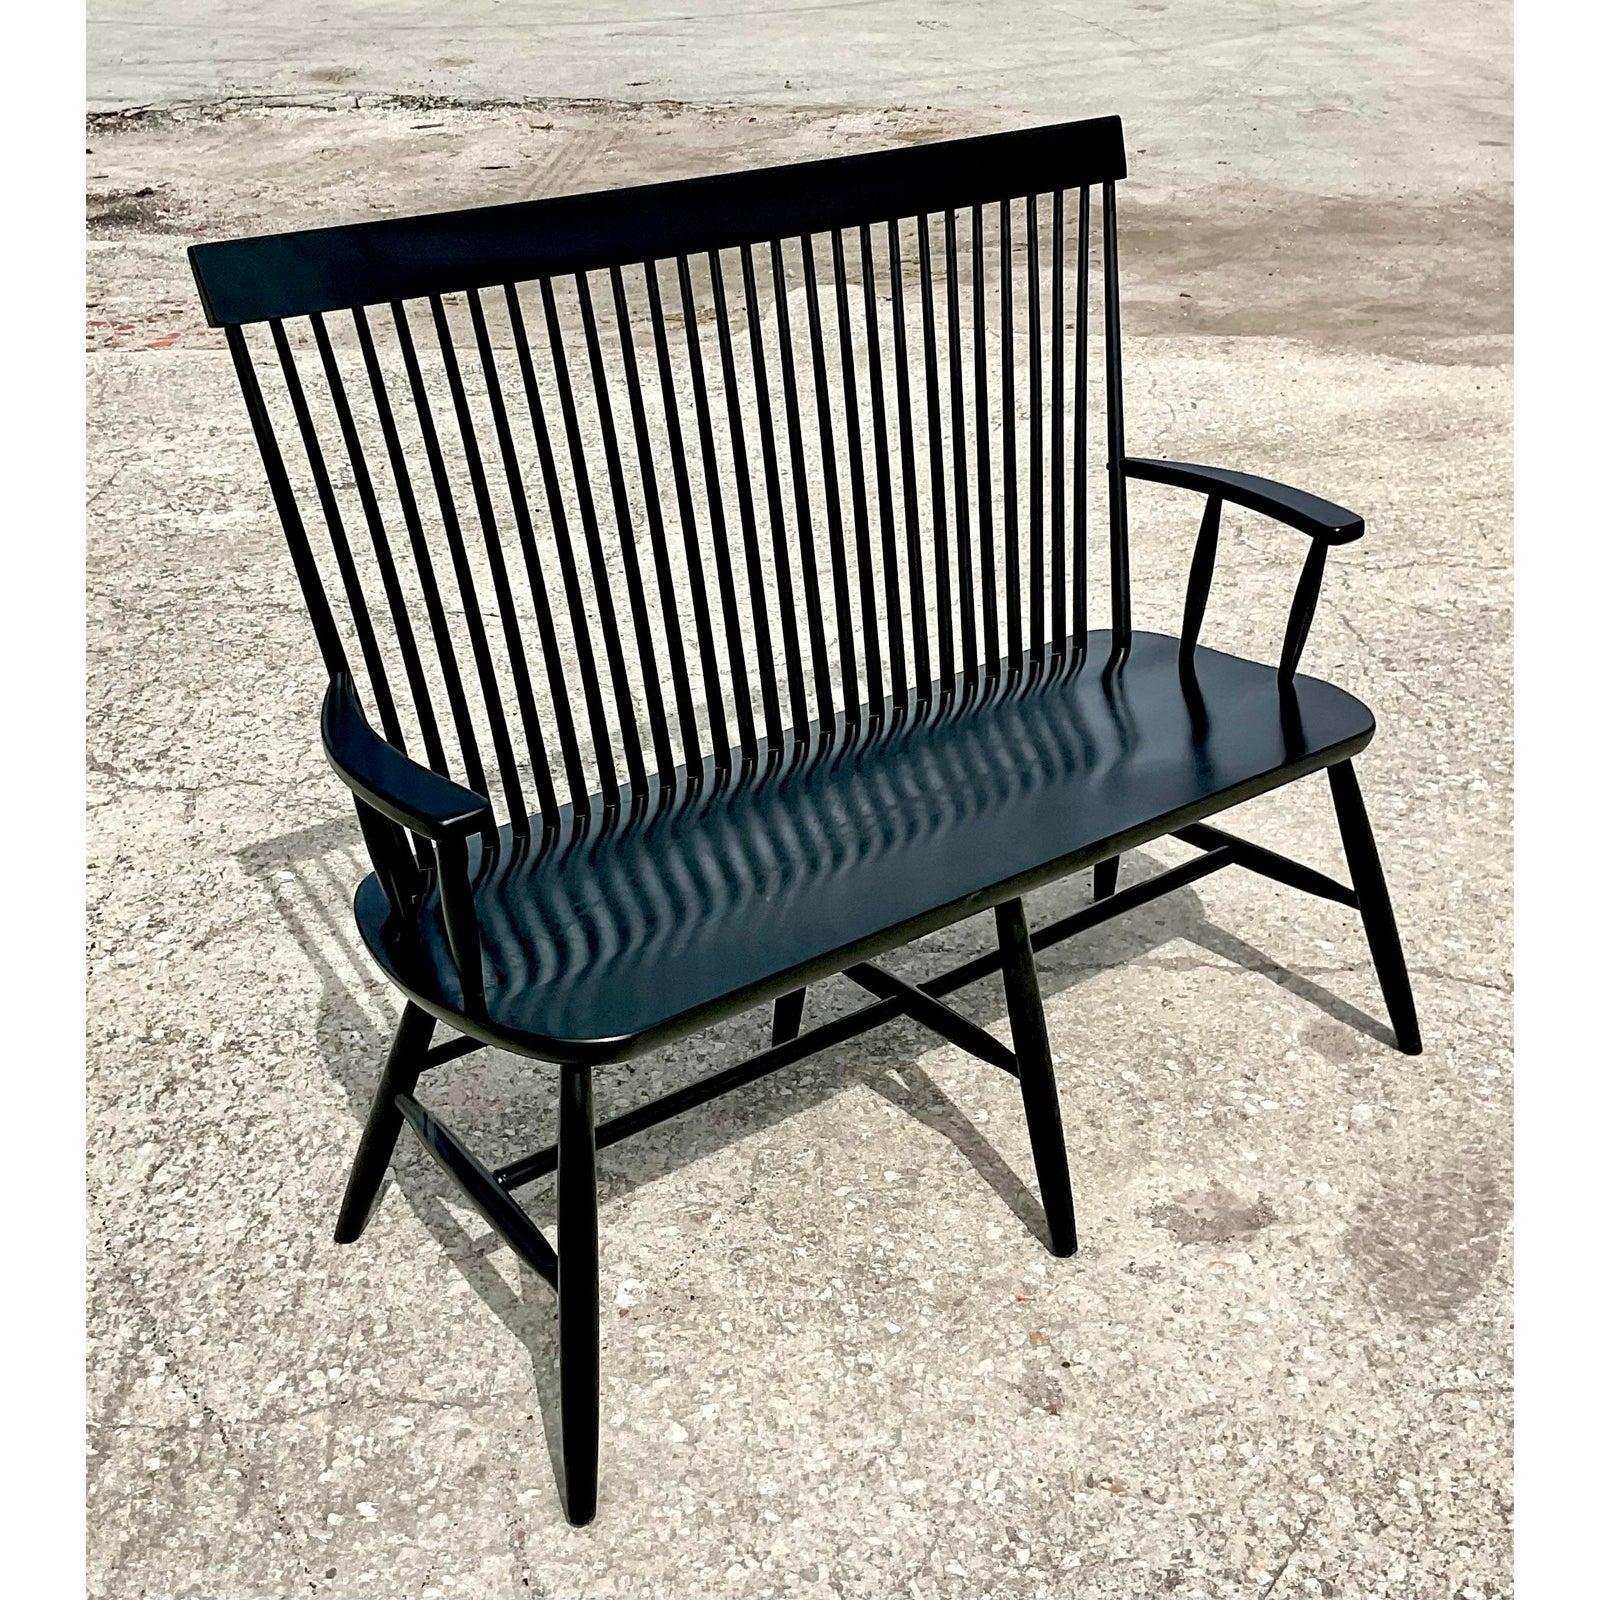 Fantastic vintage Boho Deacon’s bench. A chic painted black with a matte finish. Classic with a contemporary feel. Beautiful spindle back. Acquired from a Palm Beach estate.